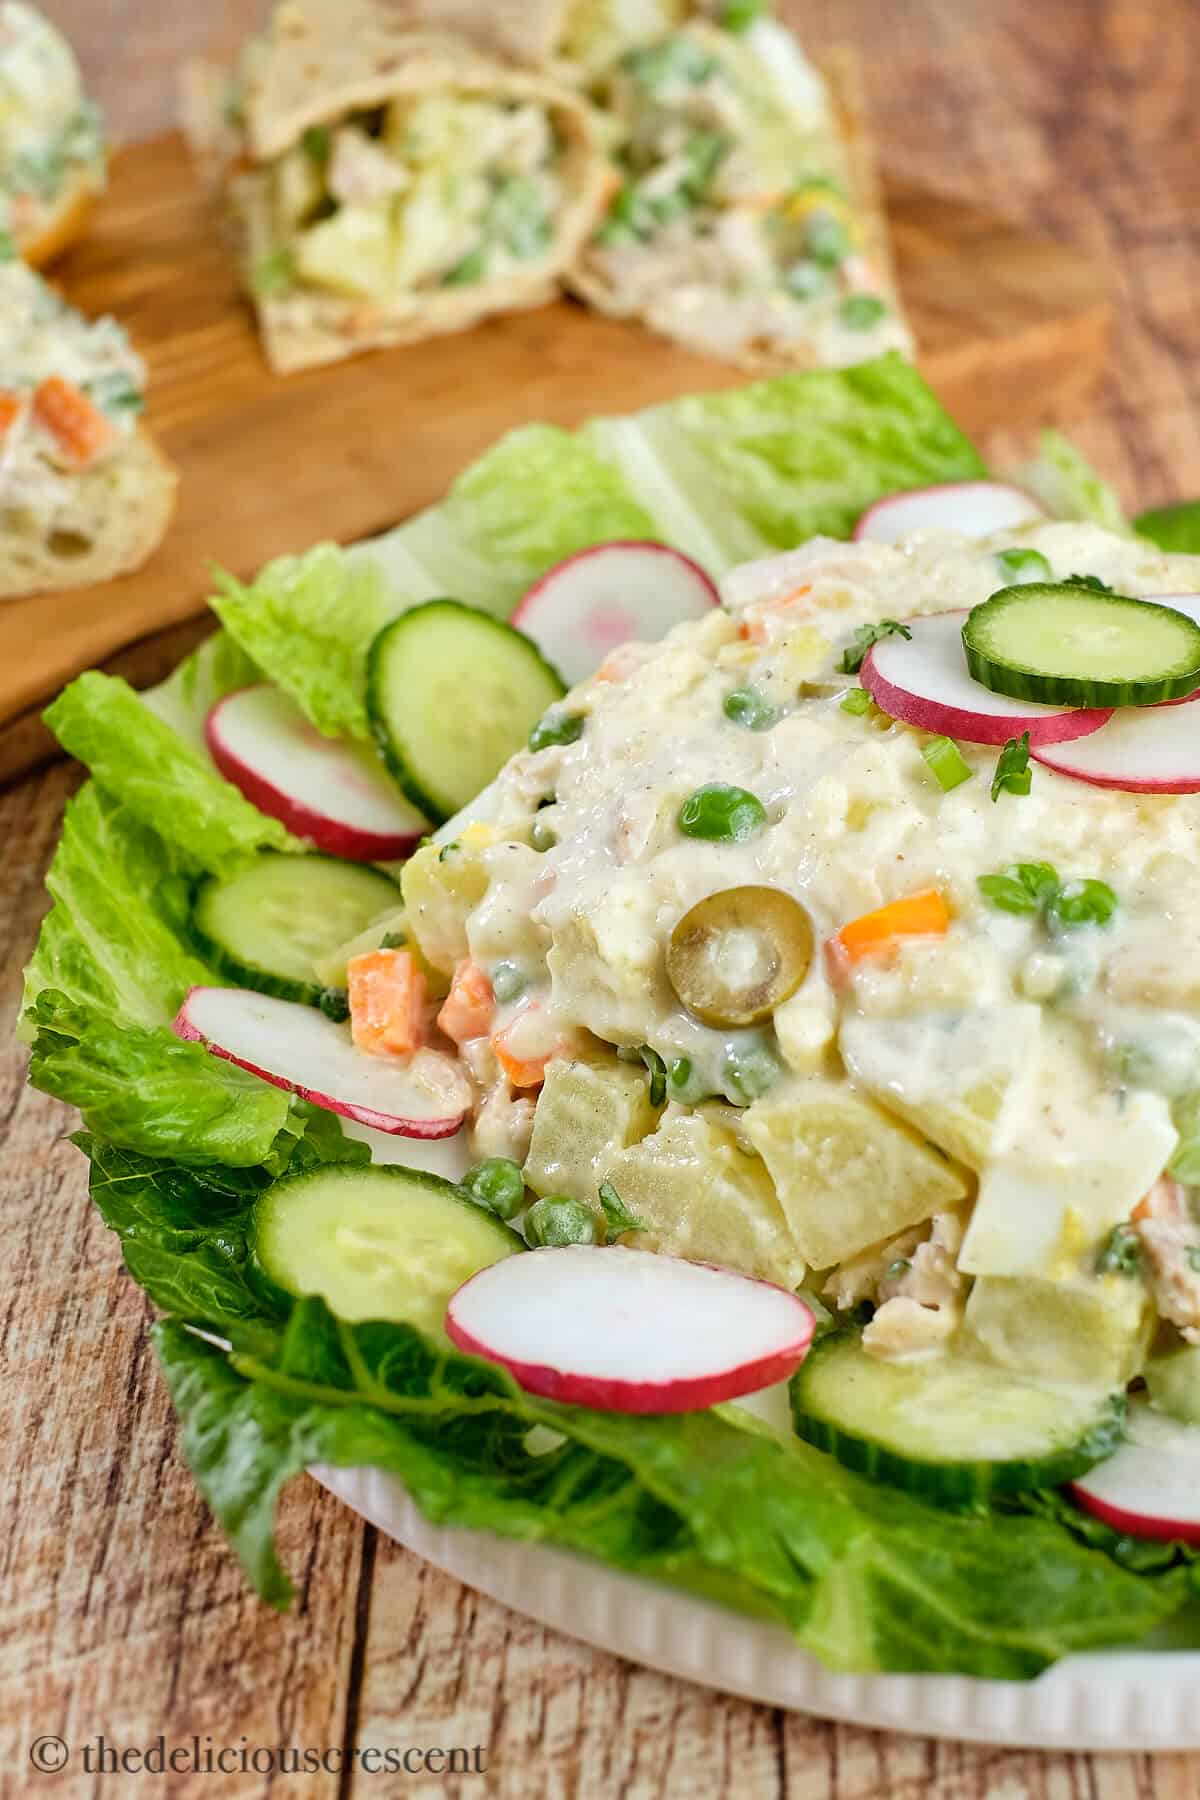 Salad olivieh made with chicken and potatoes served in a plate.